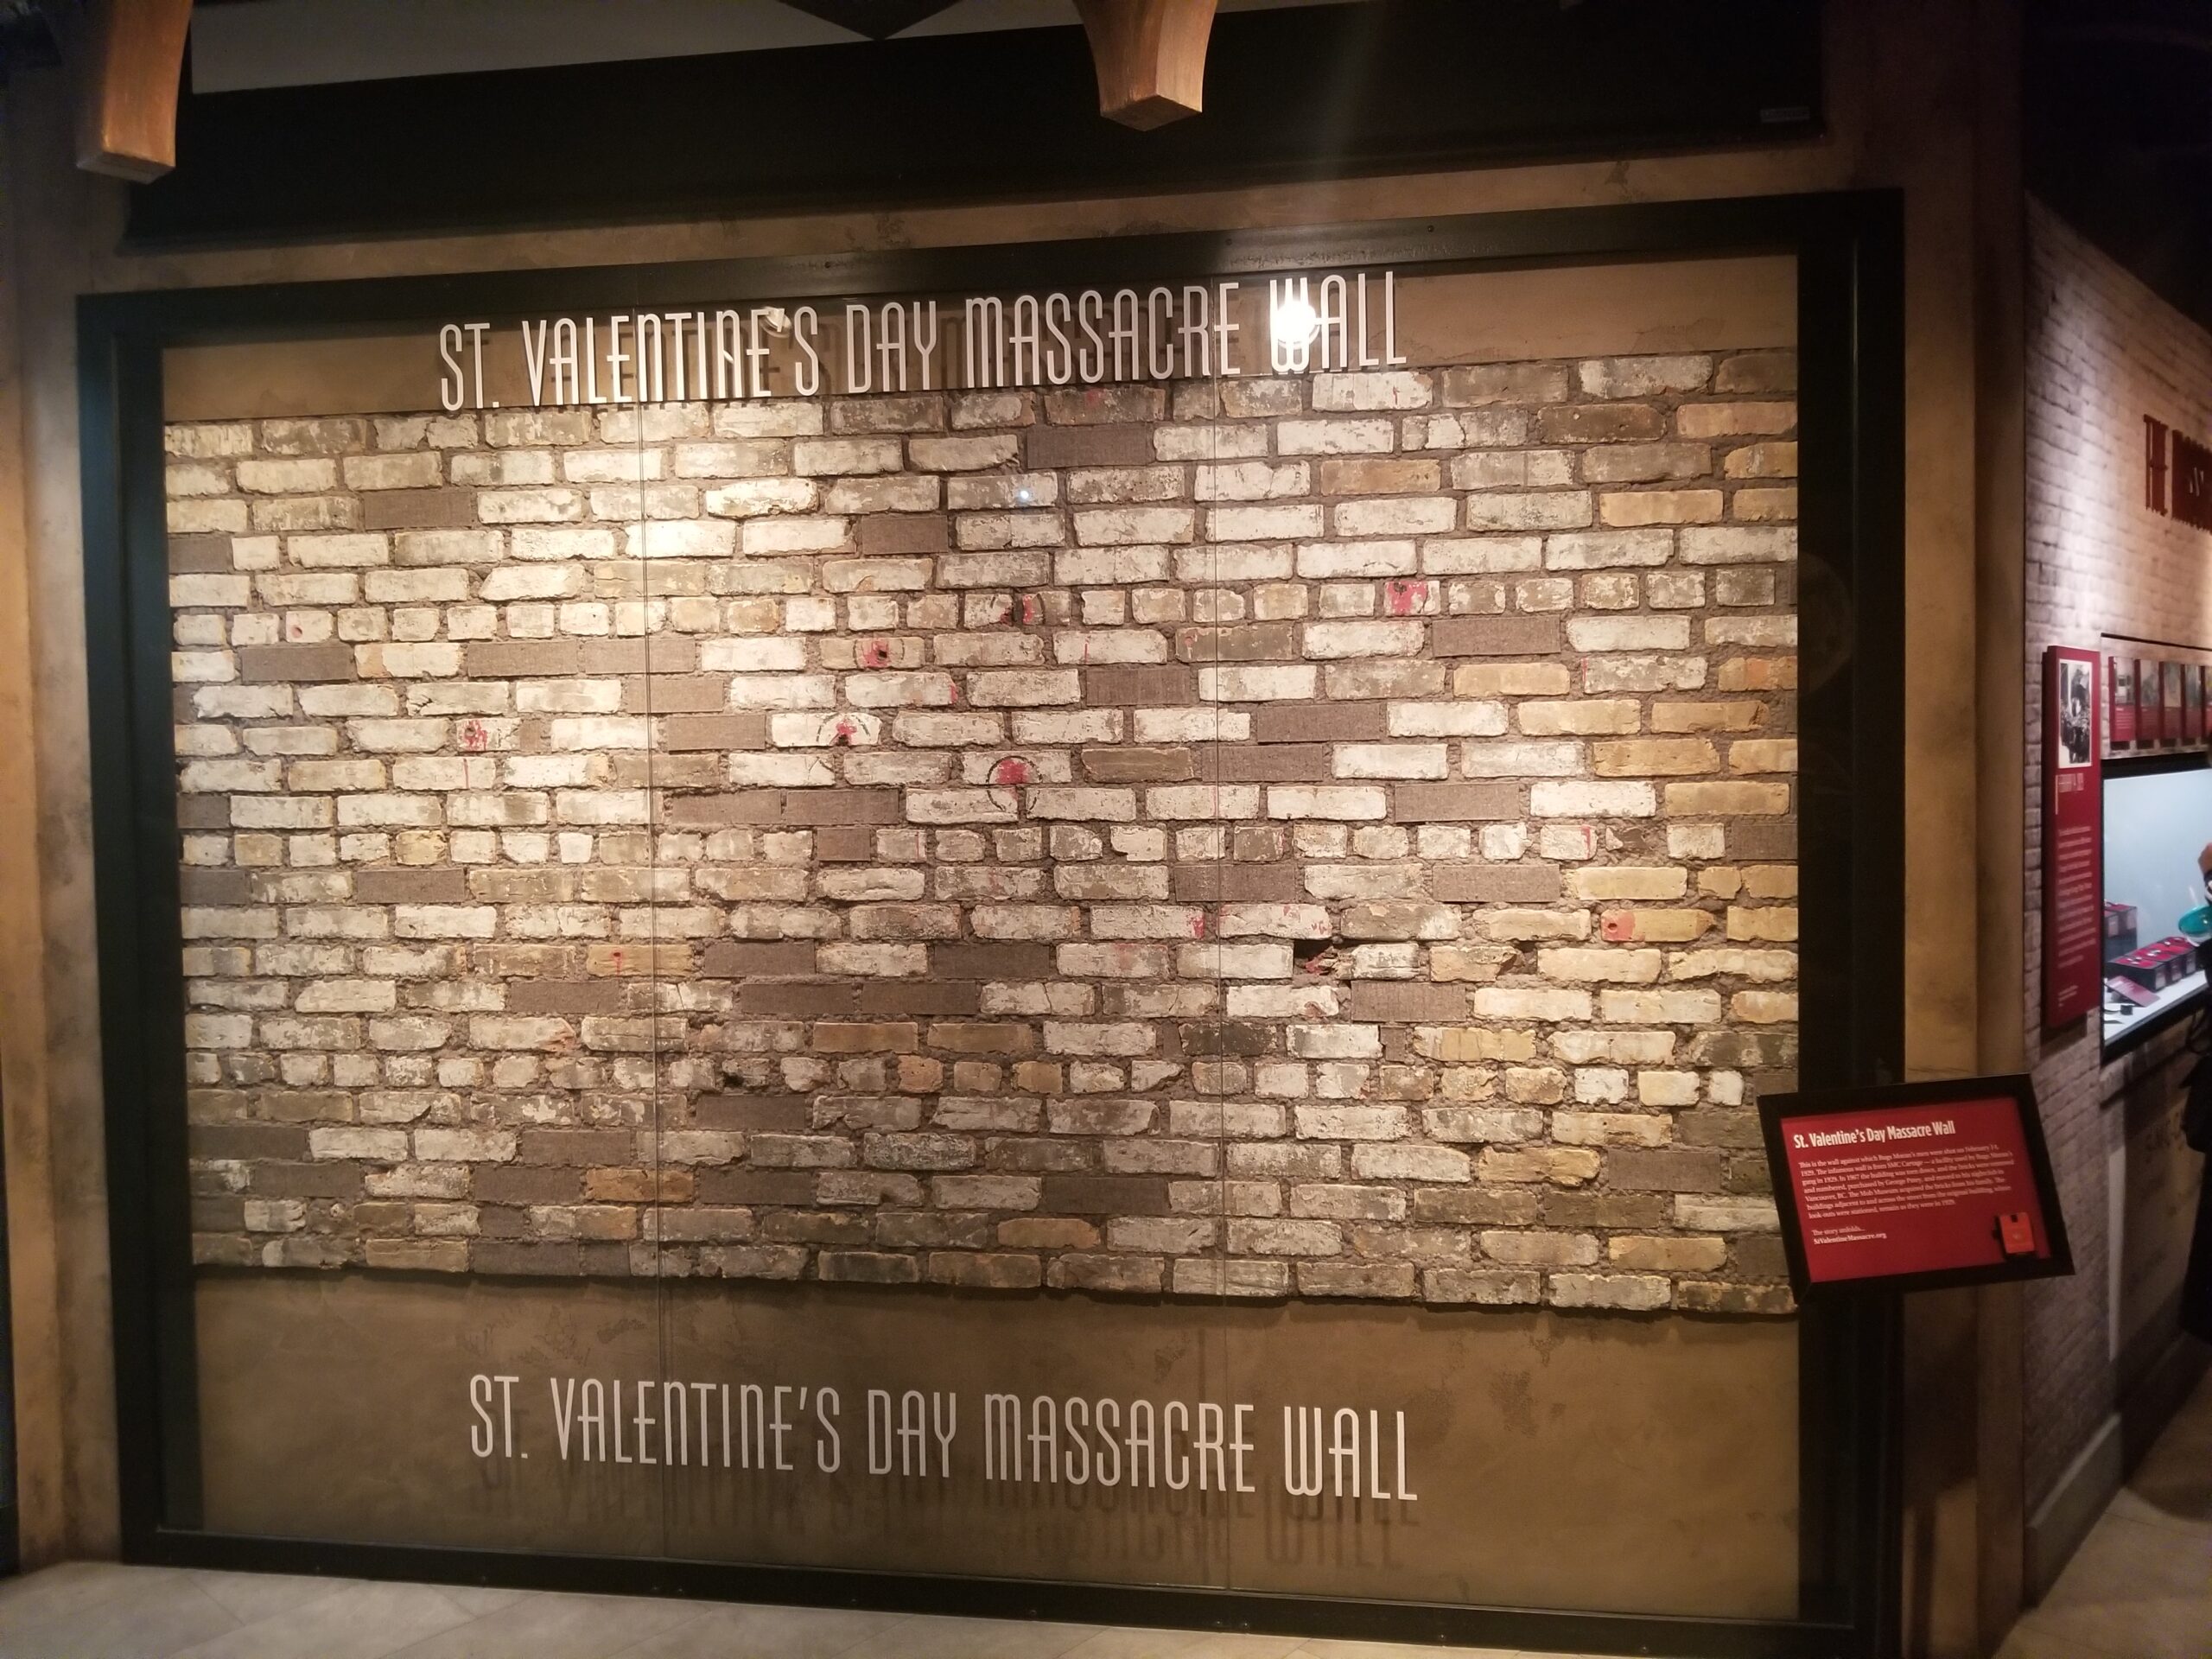 This image shows the St. Valentine's Day Massacre wall that is on display in the Mob Museum in Las Vegas. The actual bullet holes are visible when seen up close.